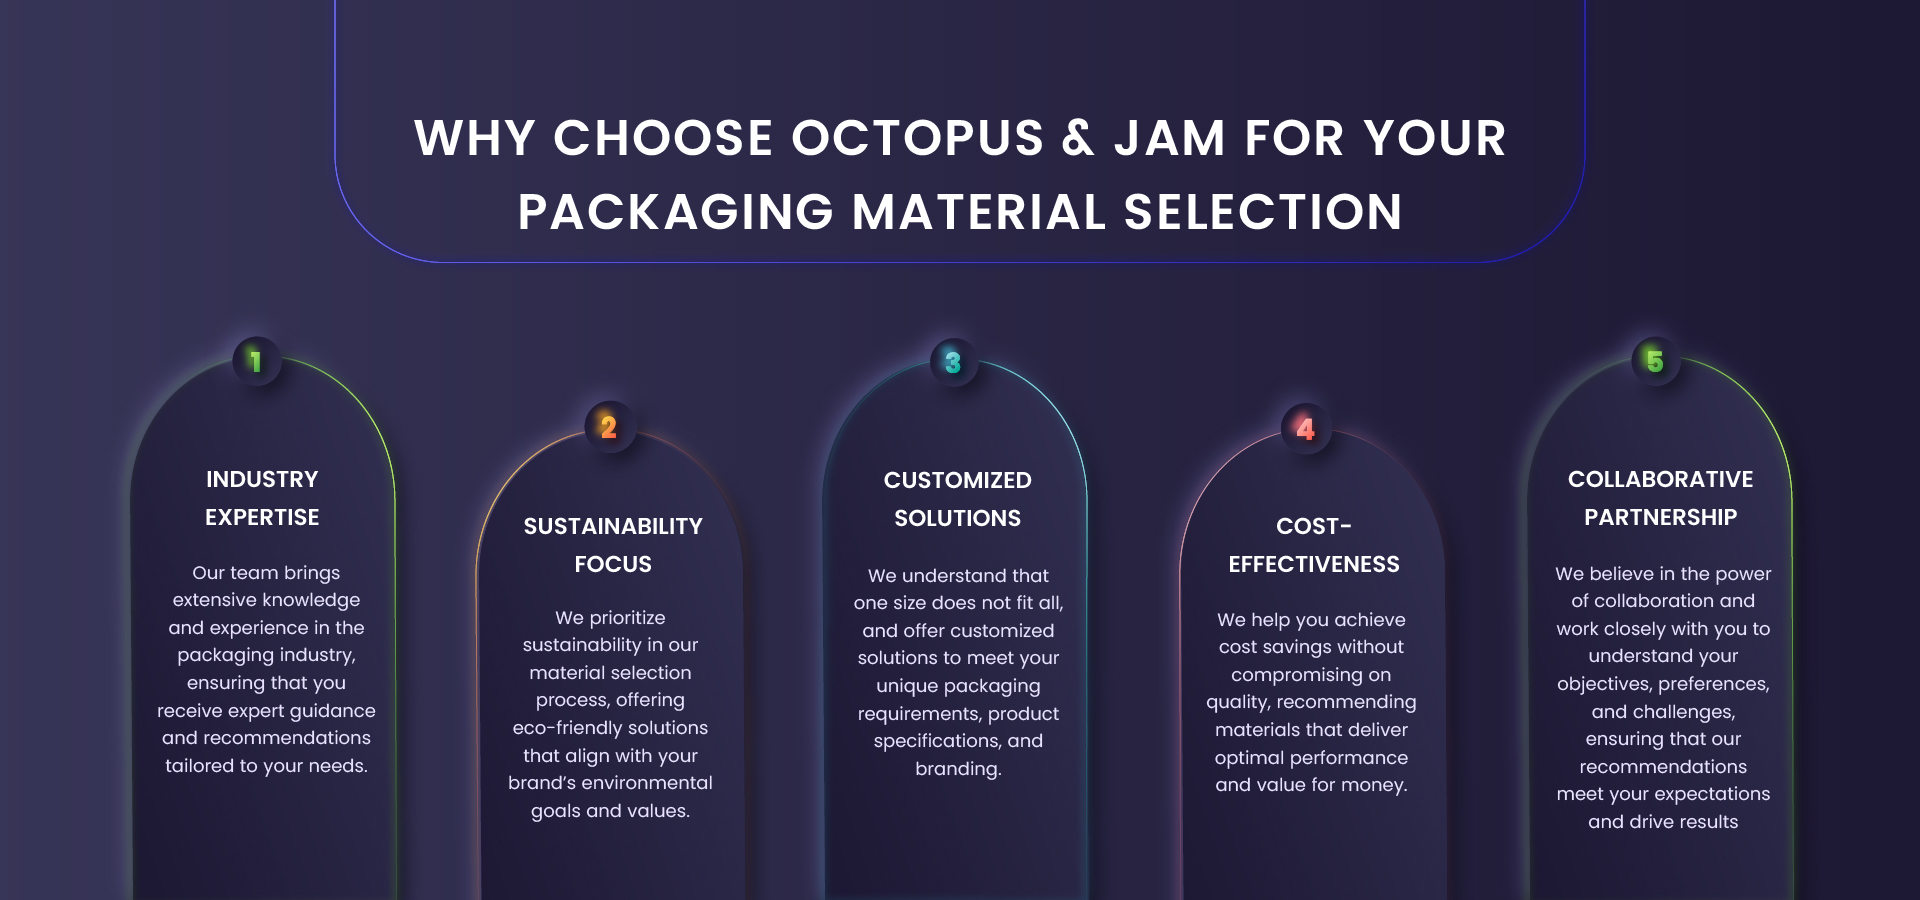 Why Choose Octopus and Jam for Your Packaging Material Selection Process